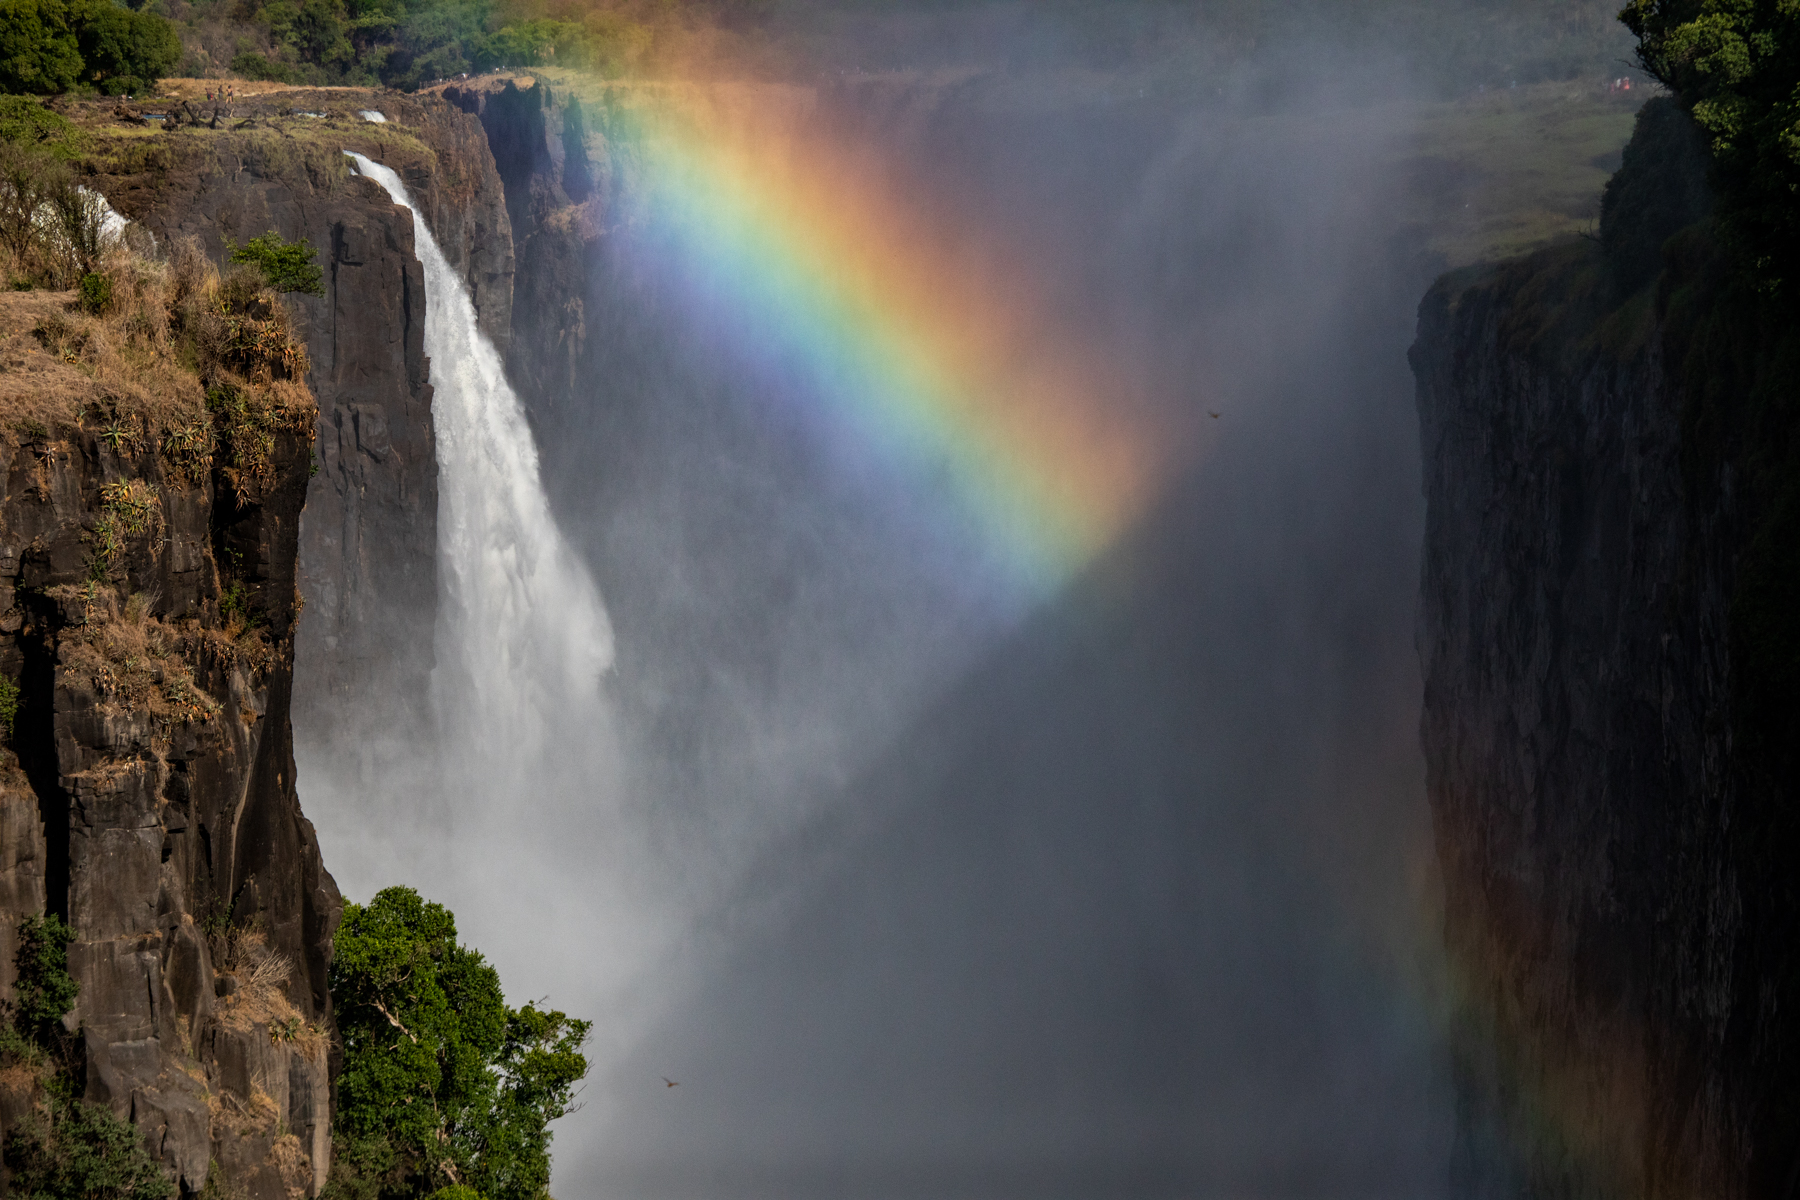 Fantastic rainbows in the clouds of spray are a lovely feature of the Victoria Falls